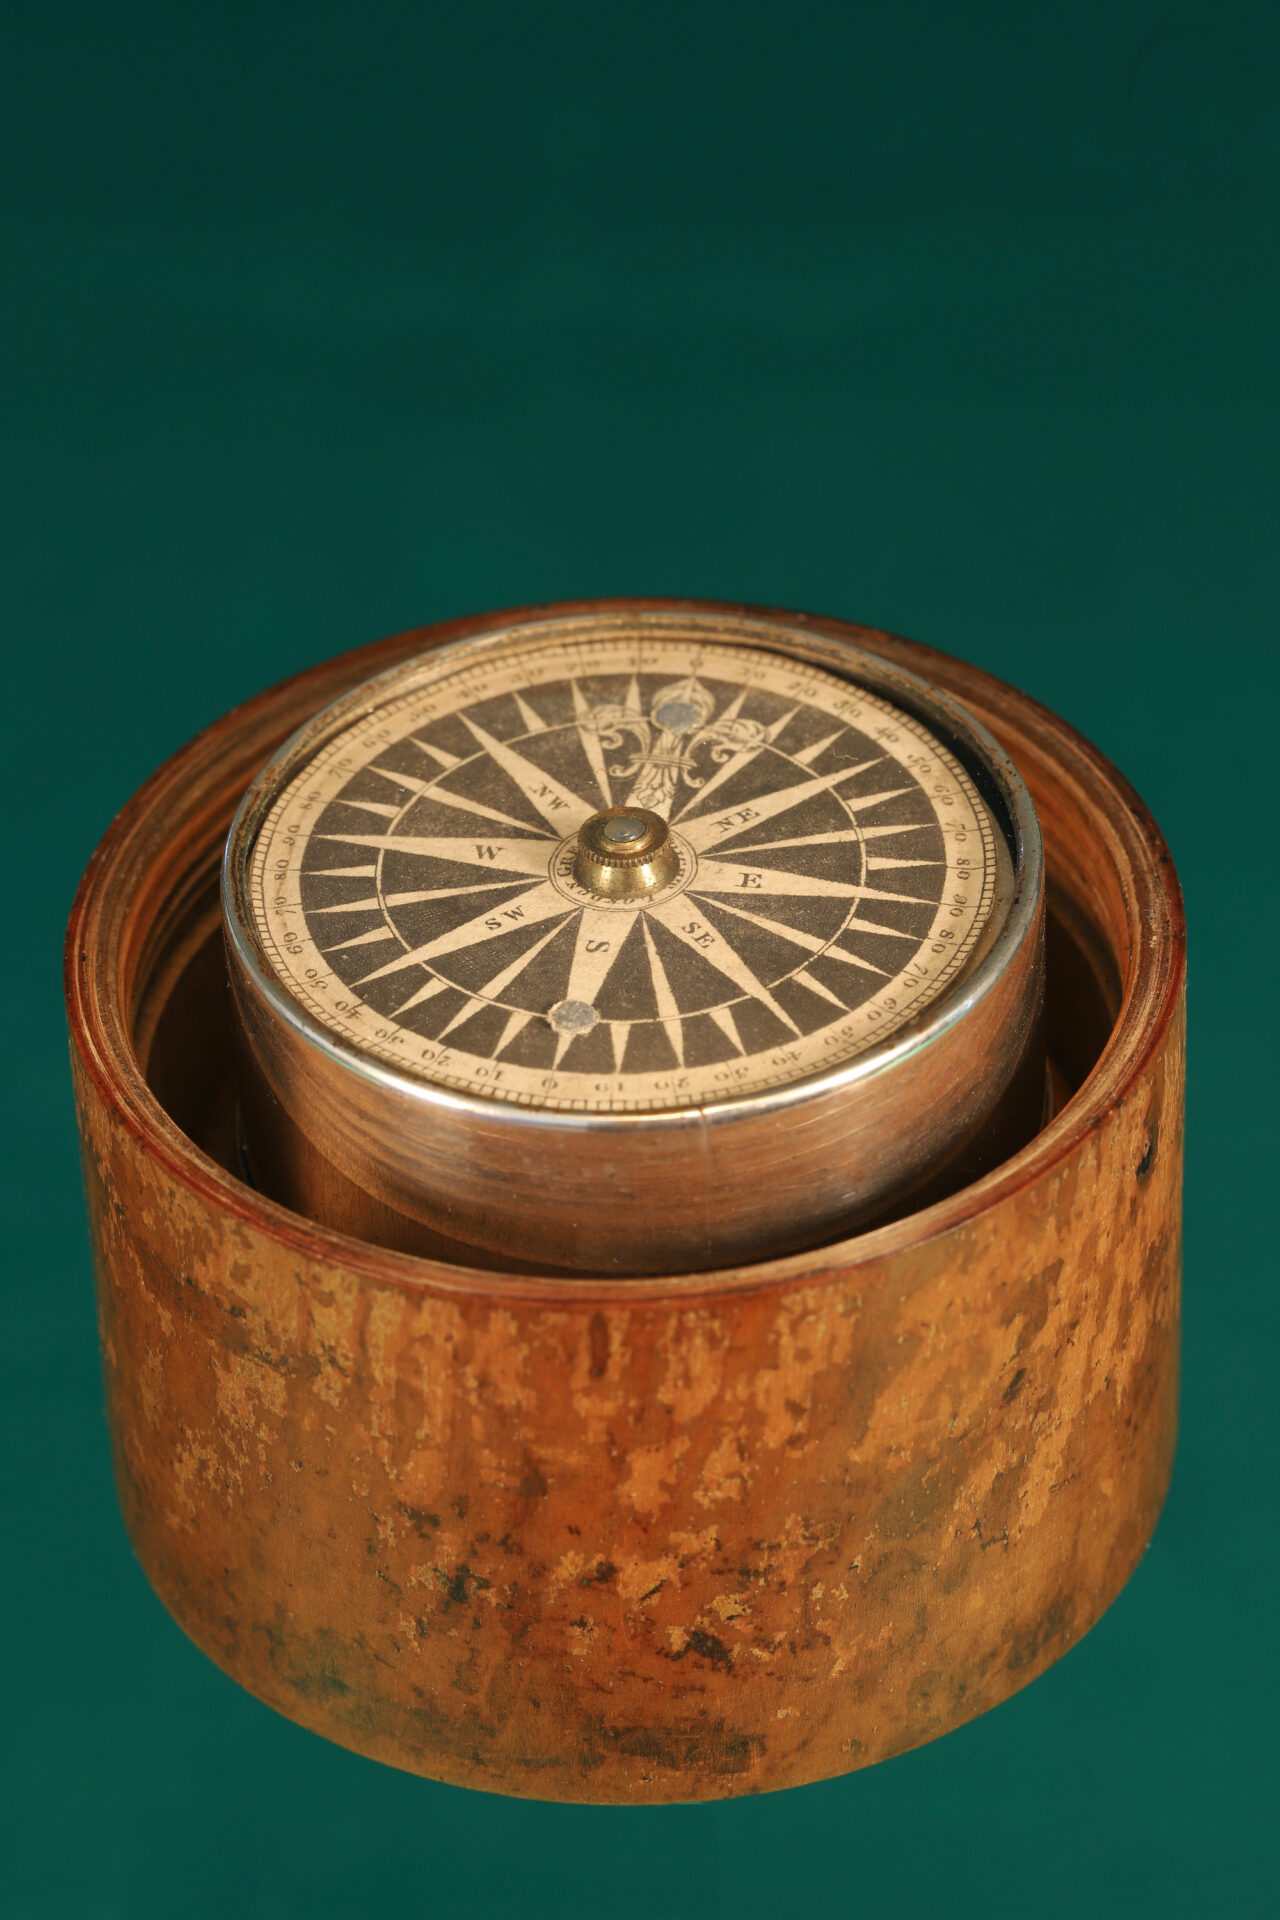 GEORGIAN GIMBALLED MARINERS COMPASS BY GREGORY & WRIGHT c1785